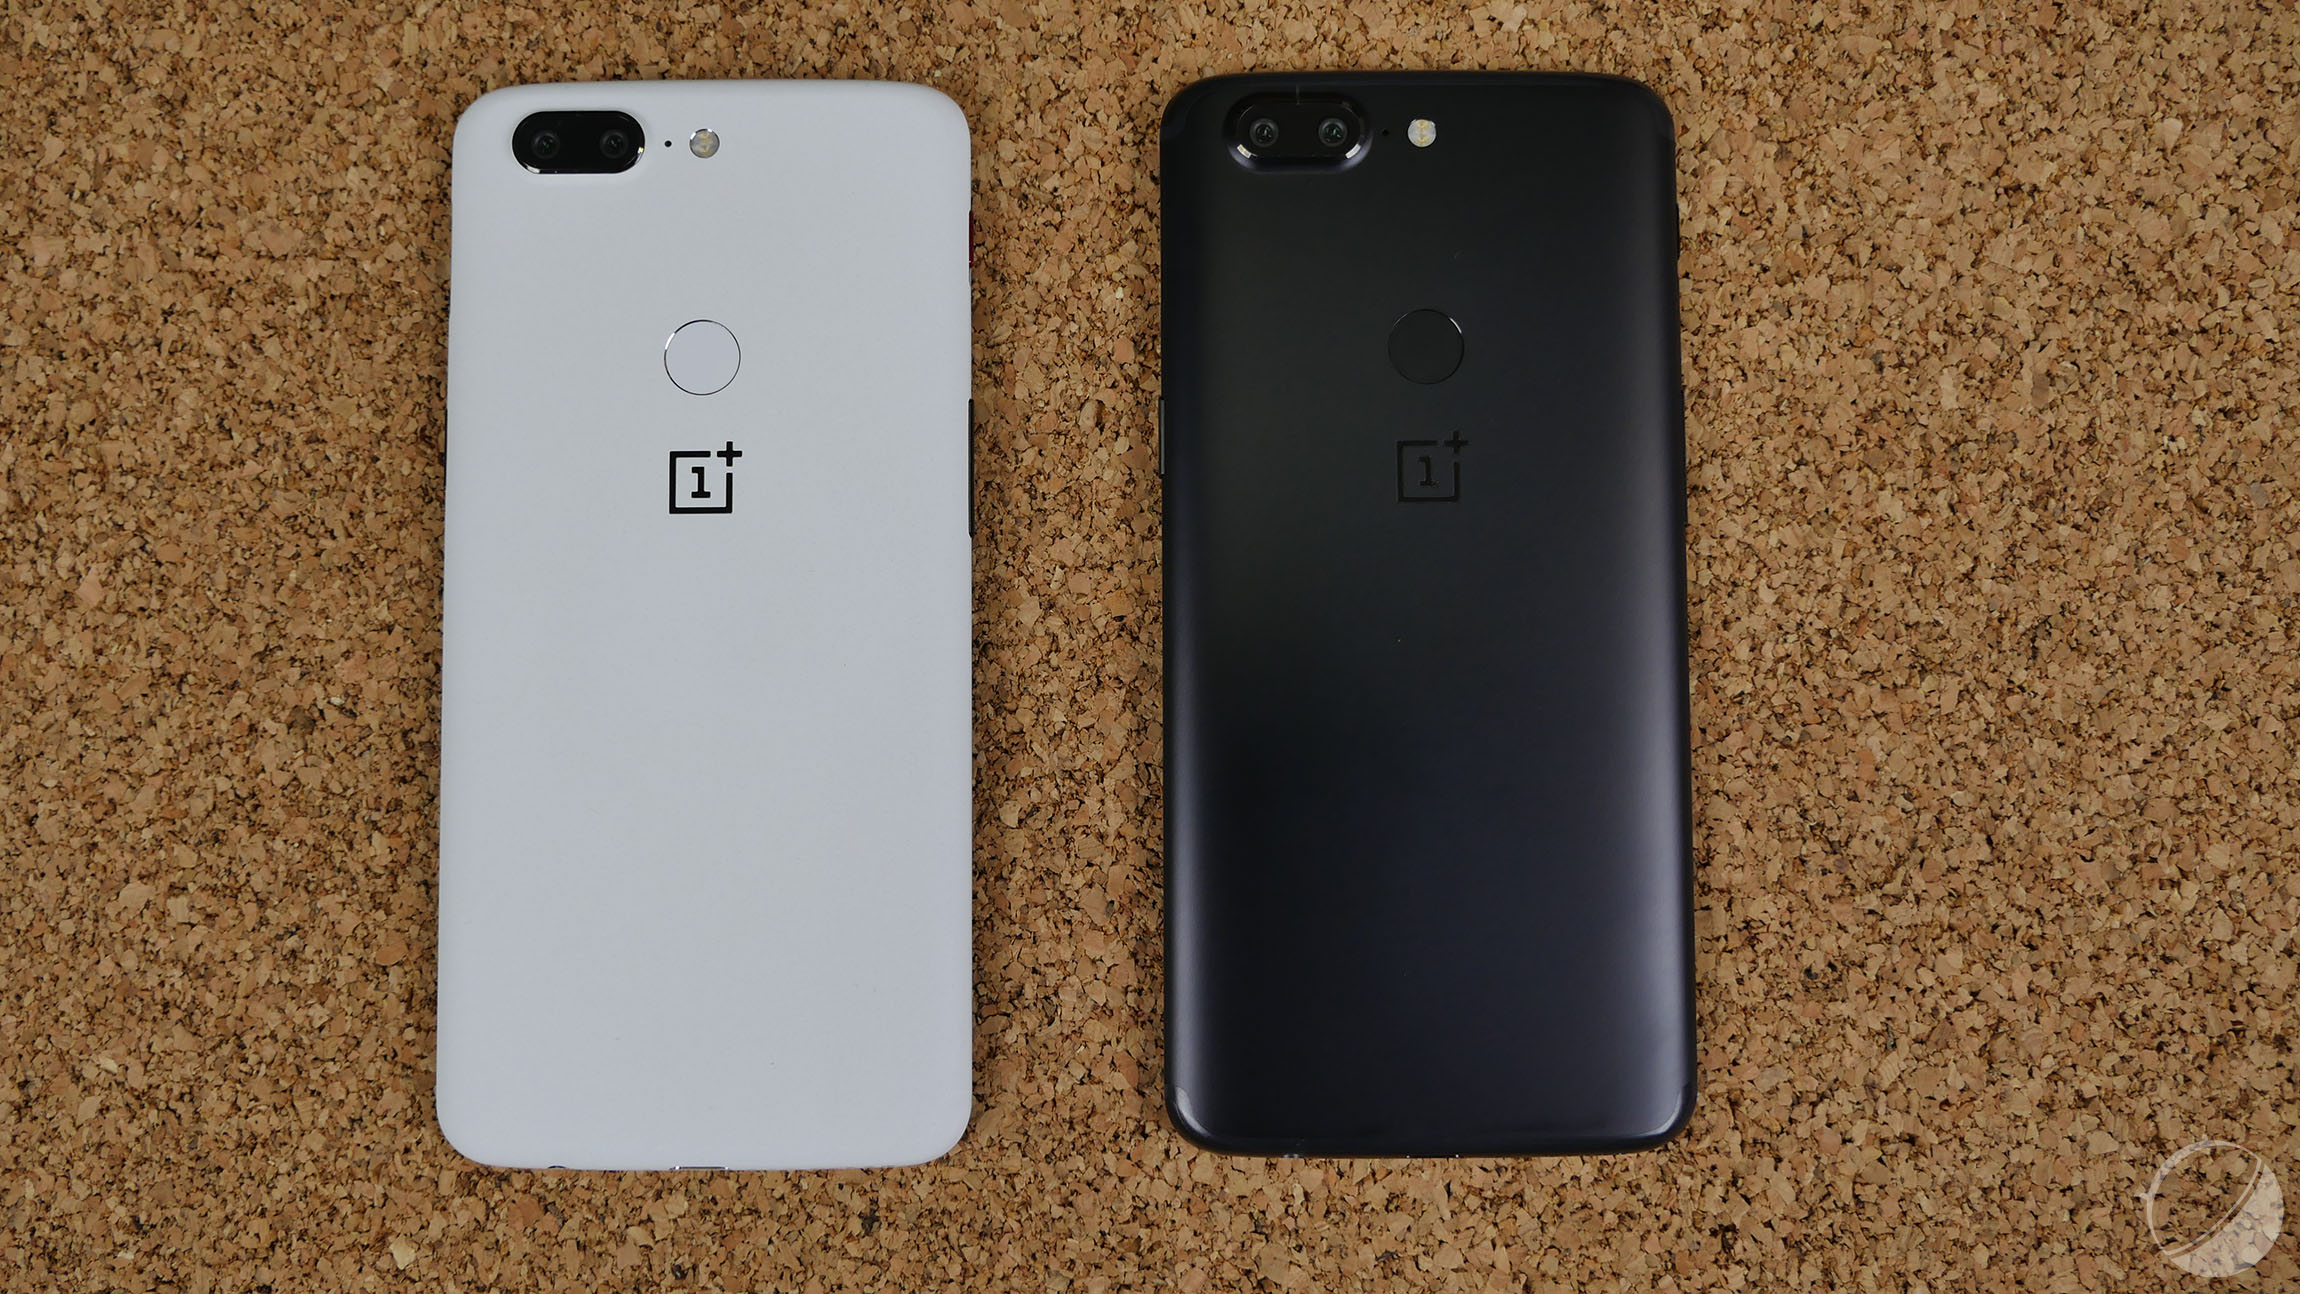 The OnePlus brand offers a premium for every security flaw discovered in its system